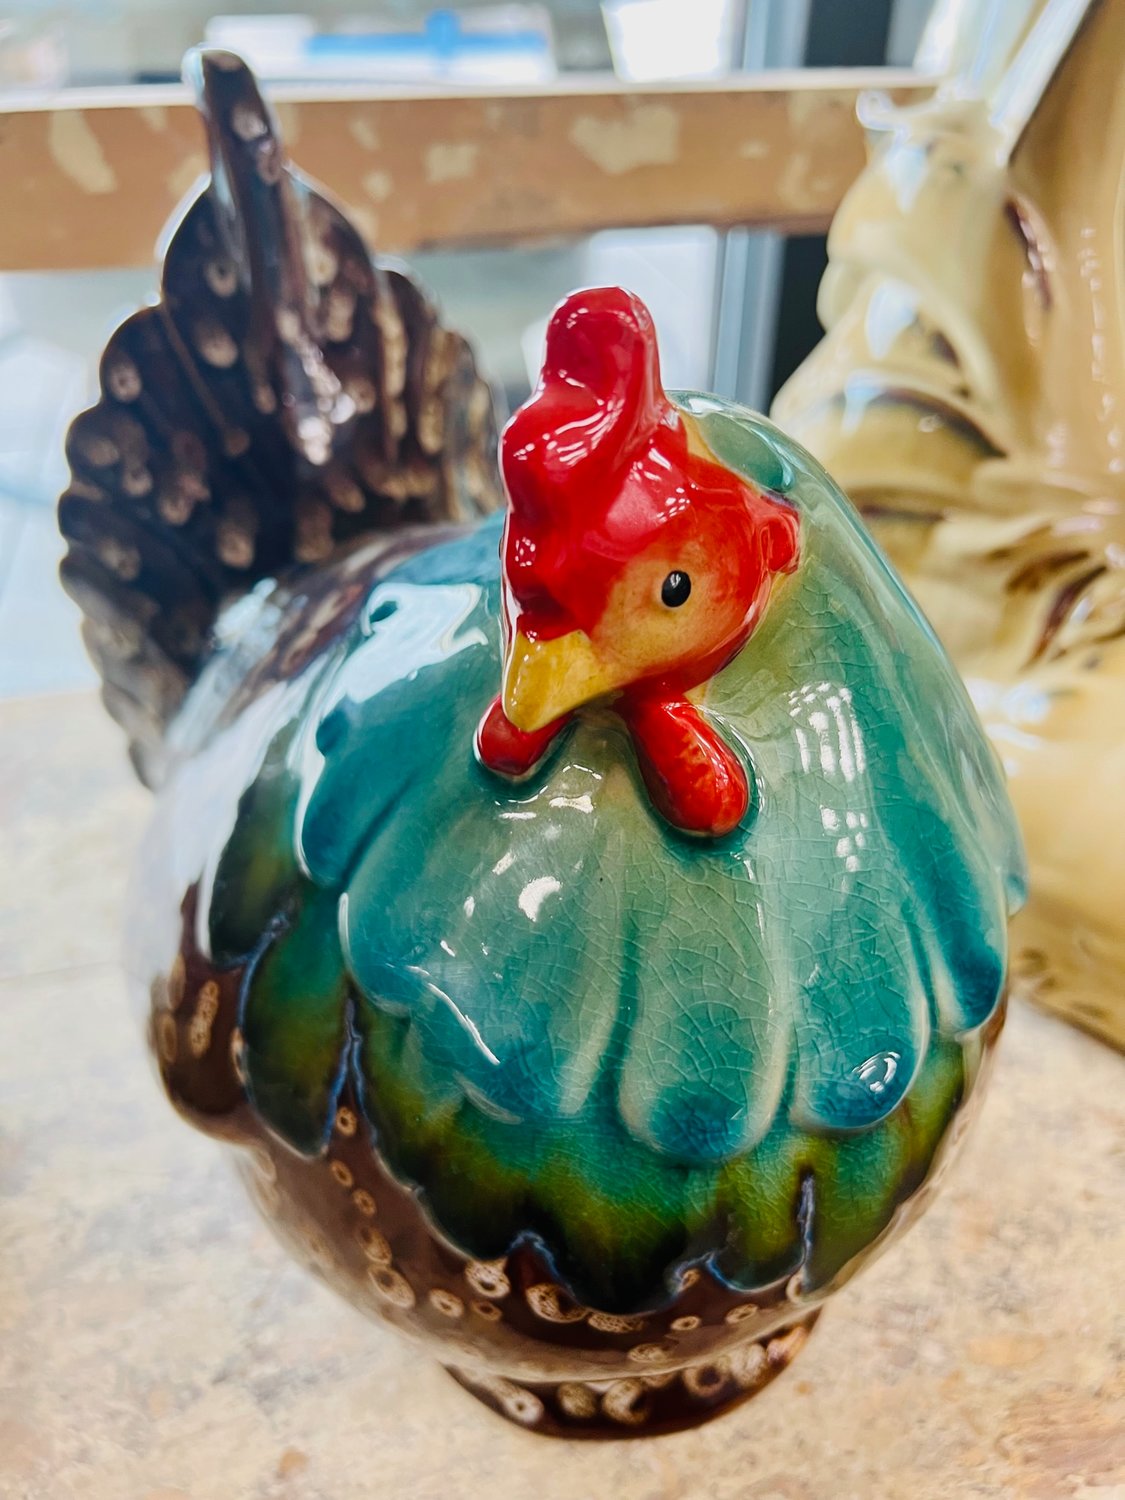 A ceramic chick is perched on a shelf.